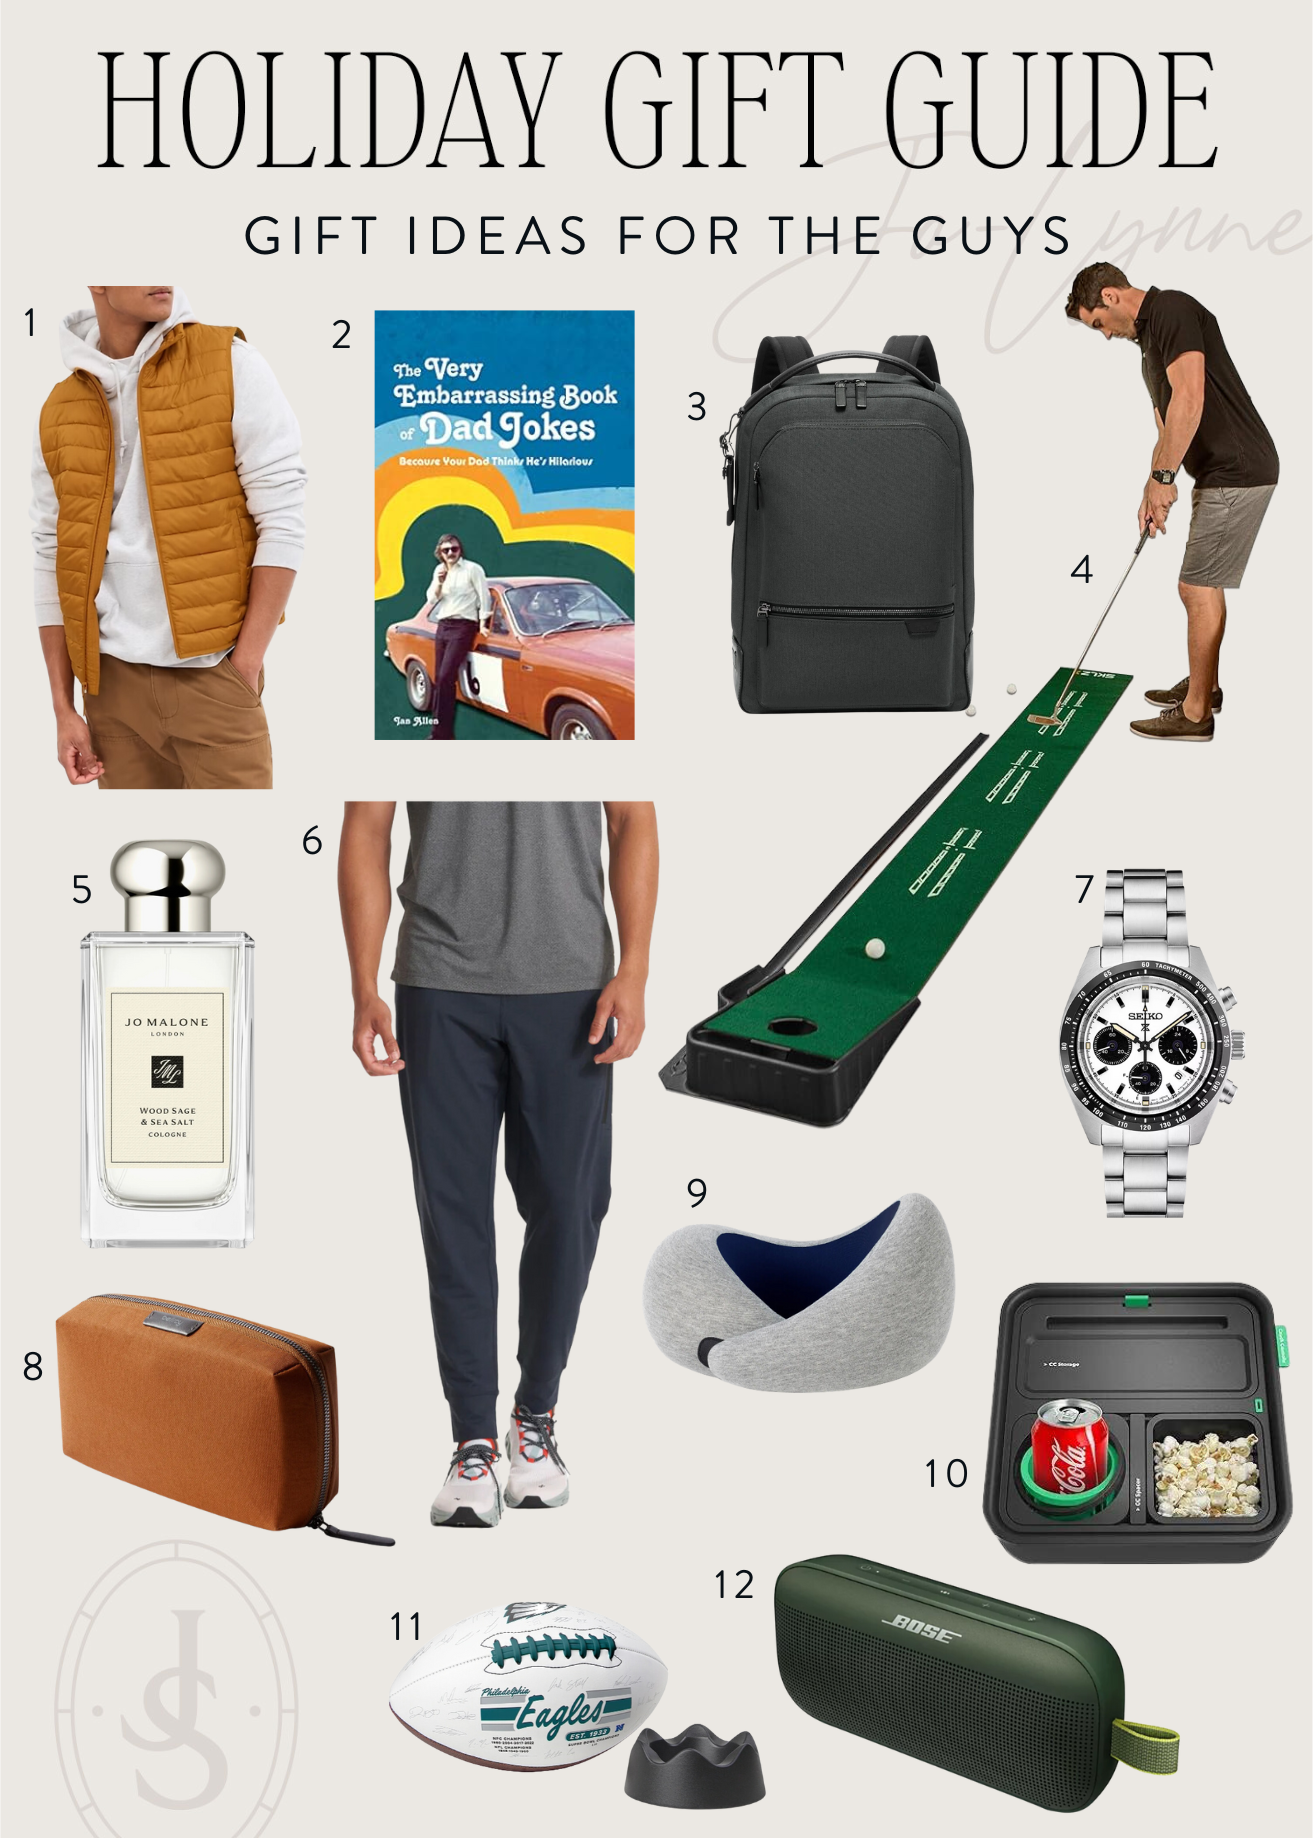 https://jolynneshane.com/wp-content/uploads/2022/10/gifts-for-the-guys_holiday-gift-guide-2023.png